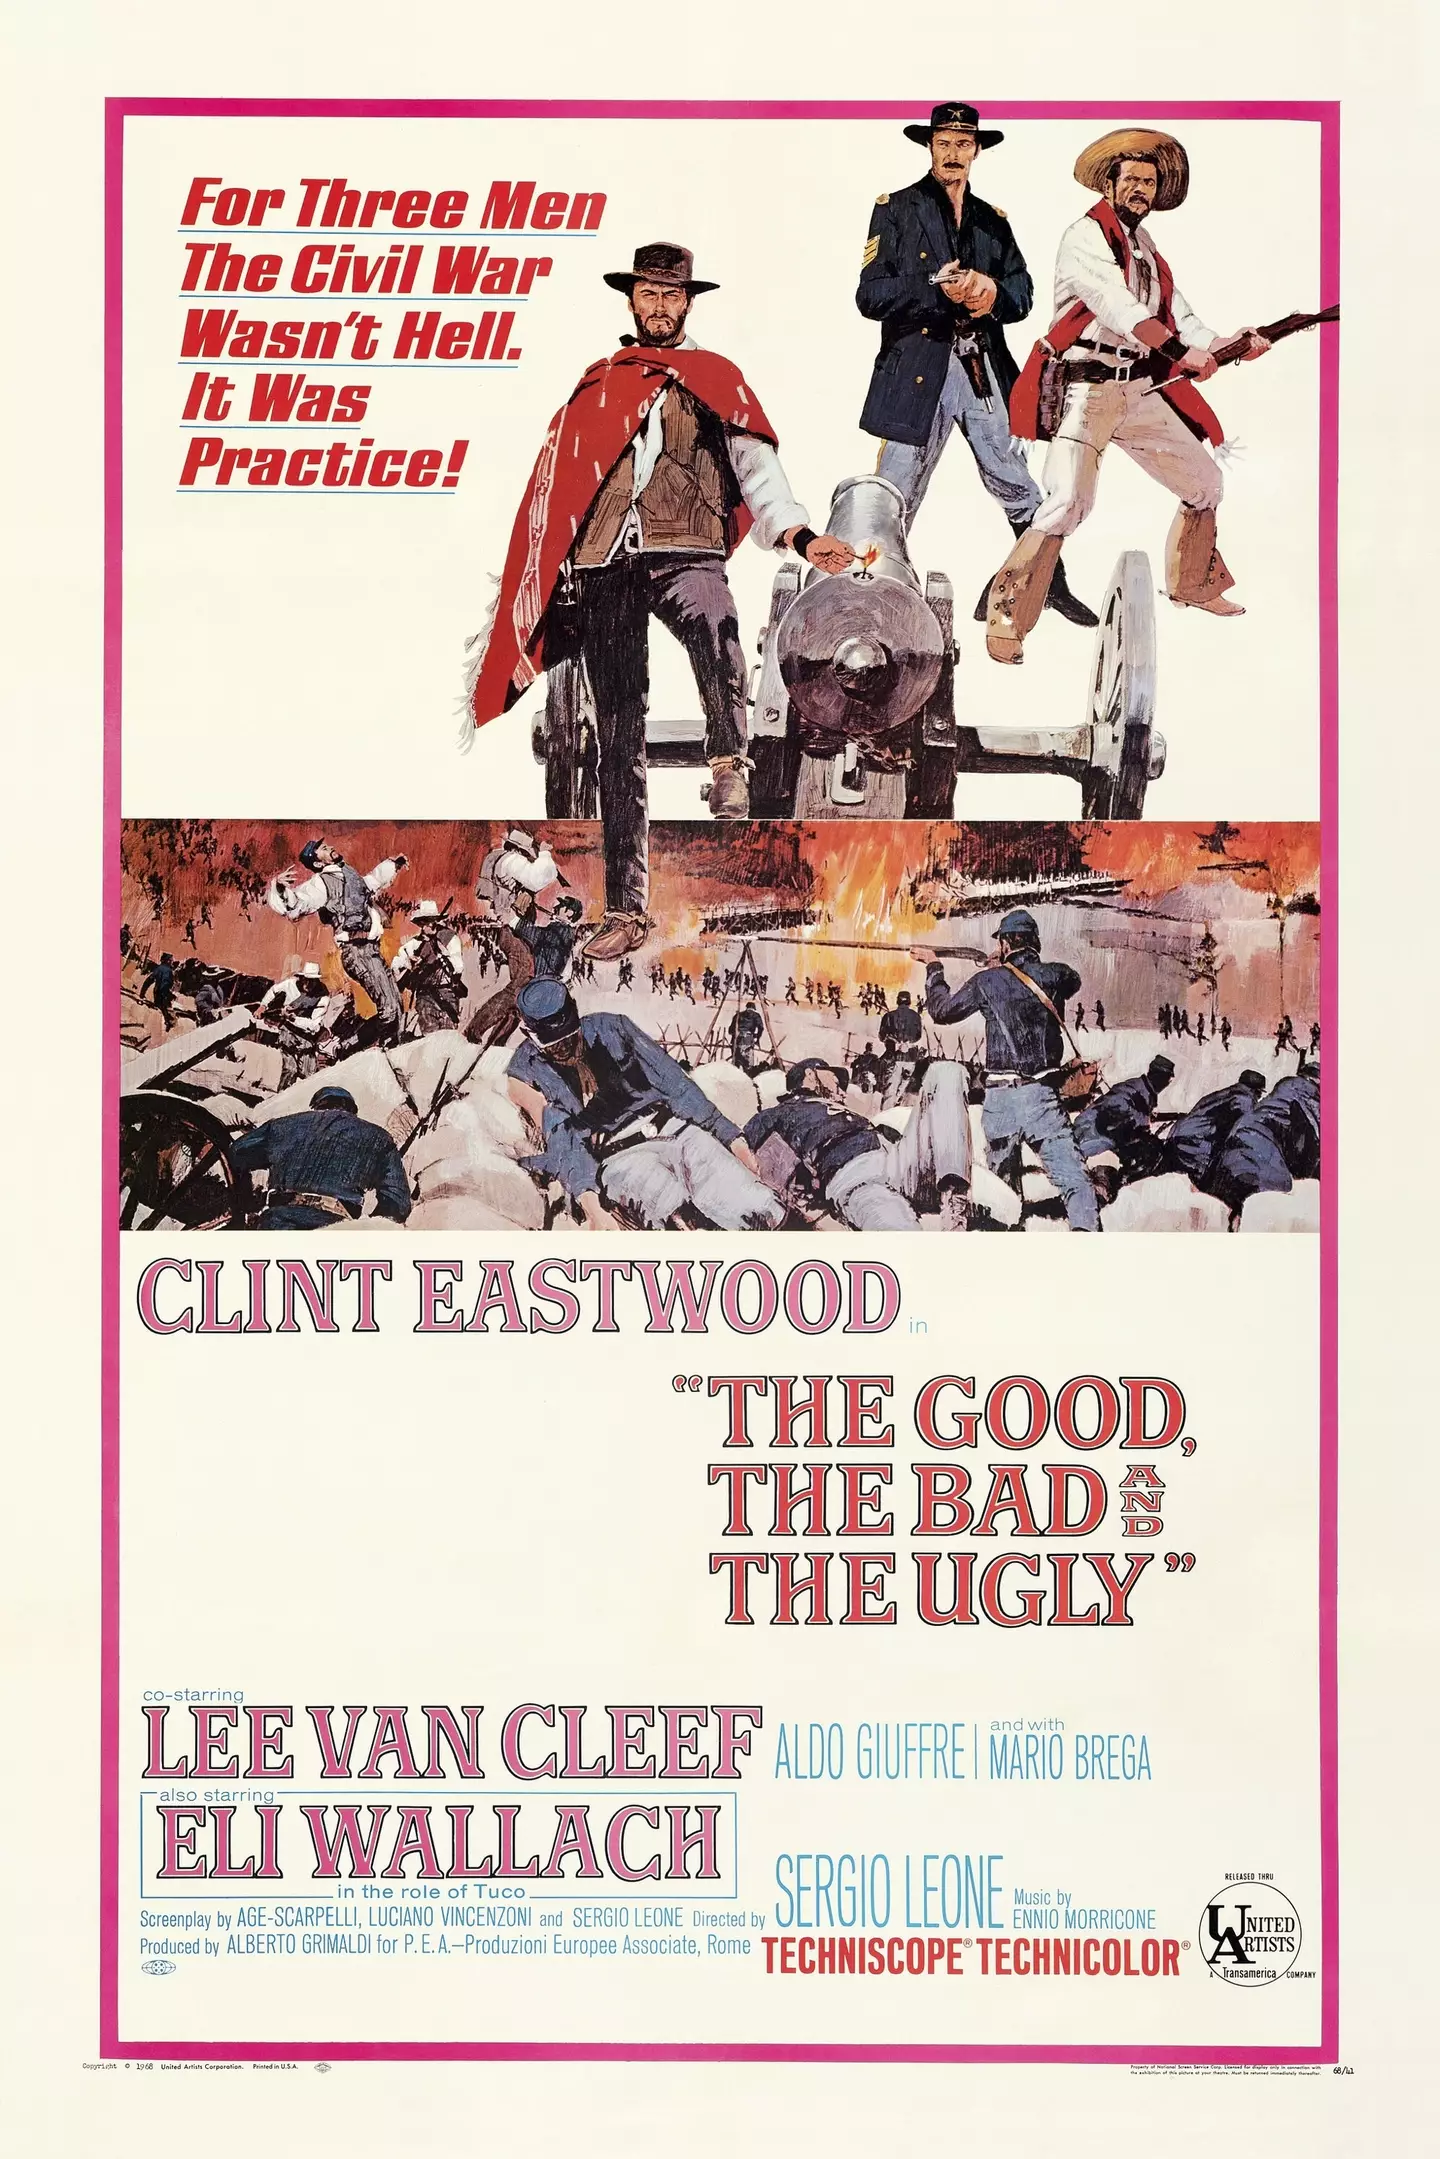 The Clint Eastwood classic was his top pick.